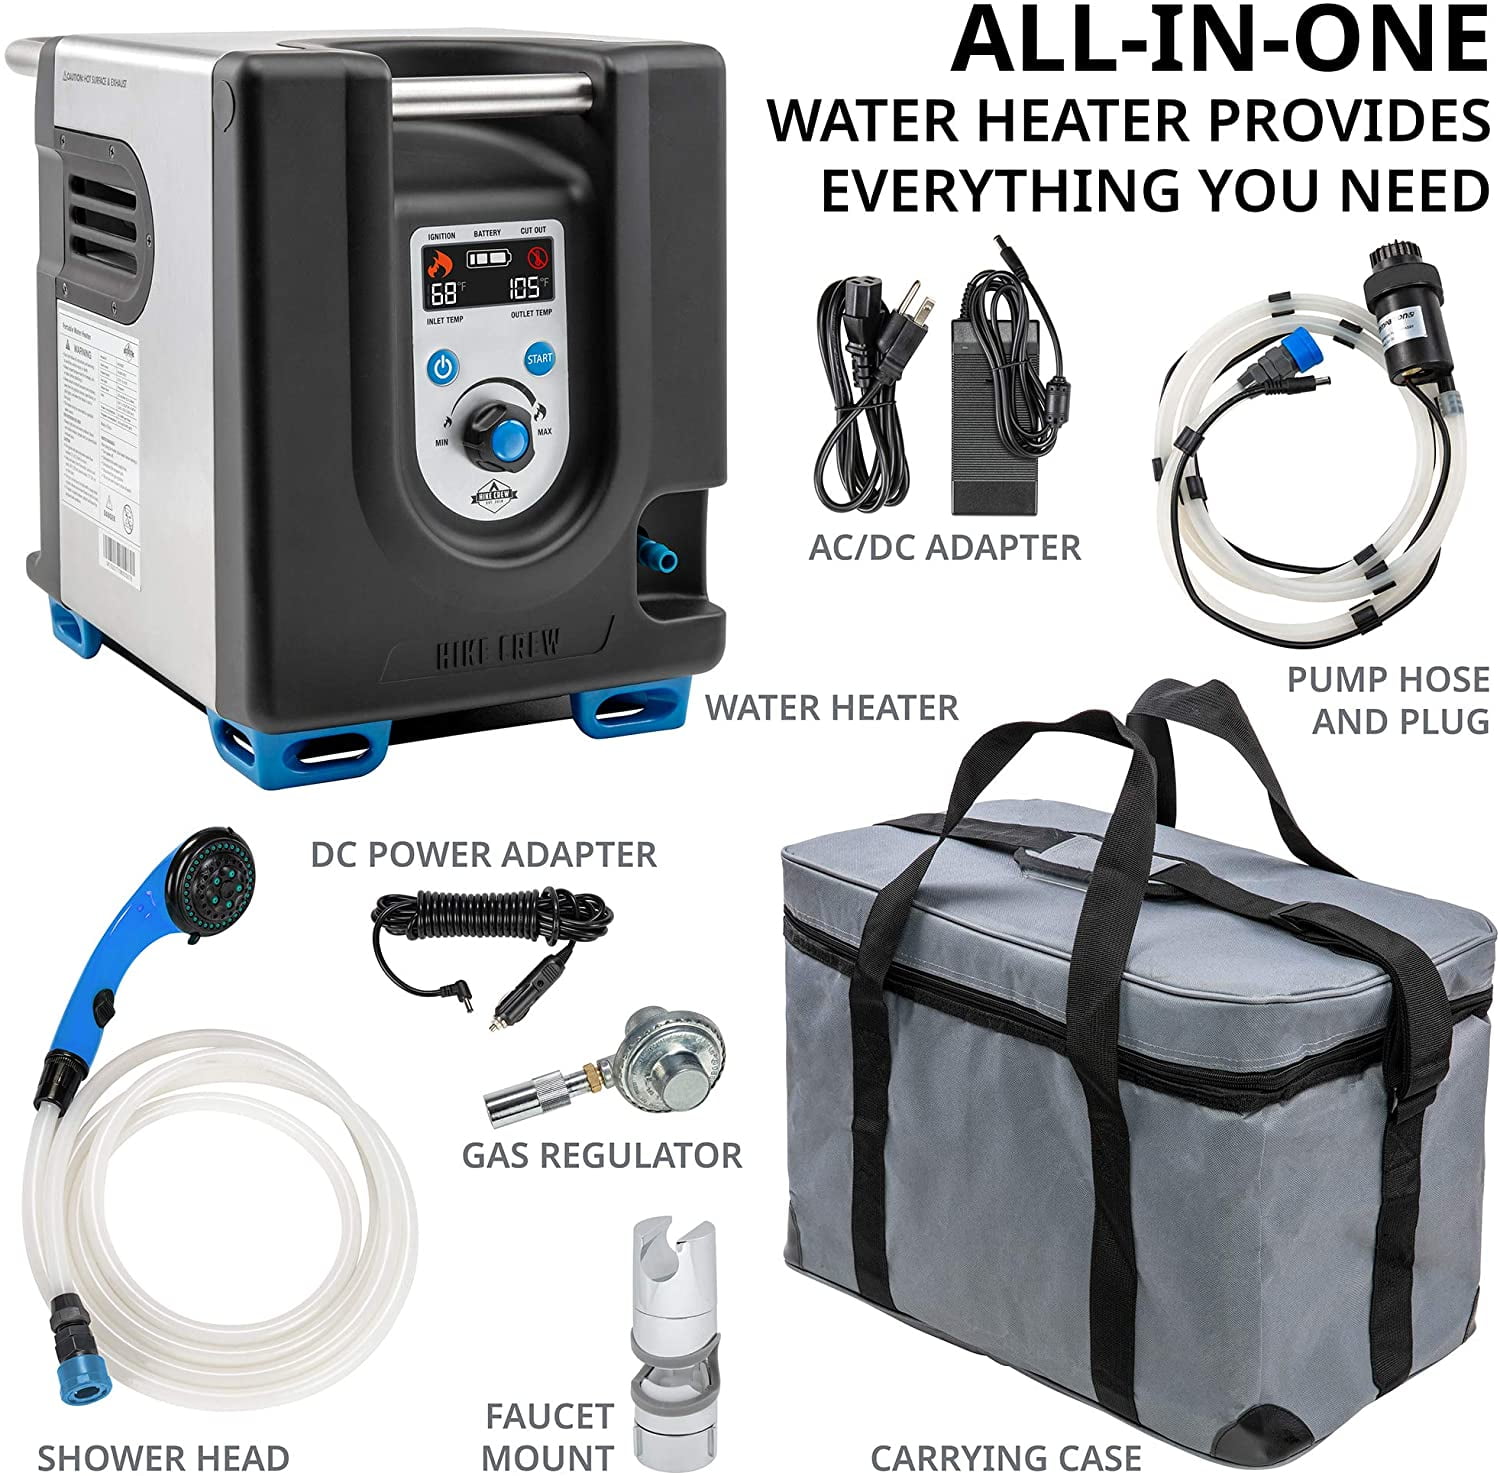 Hike Crew Portable Propane Water Heater & Shower Pump Auto Safety Shutoff & Carry Case Compact Outdoor Cleaning & Showering System w/Built-in Battery LCD Instant Hot Water for Camping & Hiking 